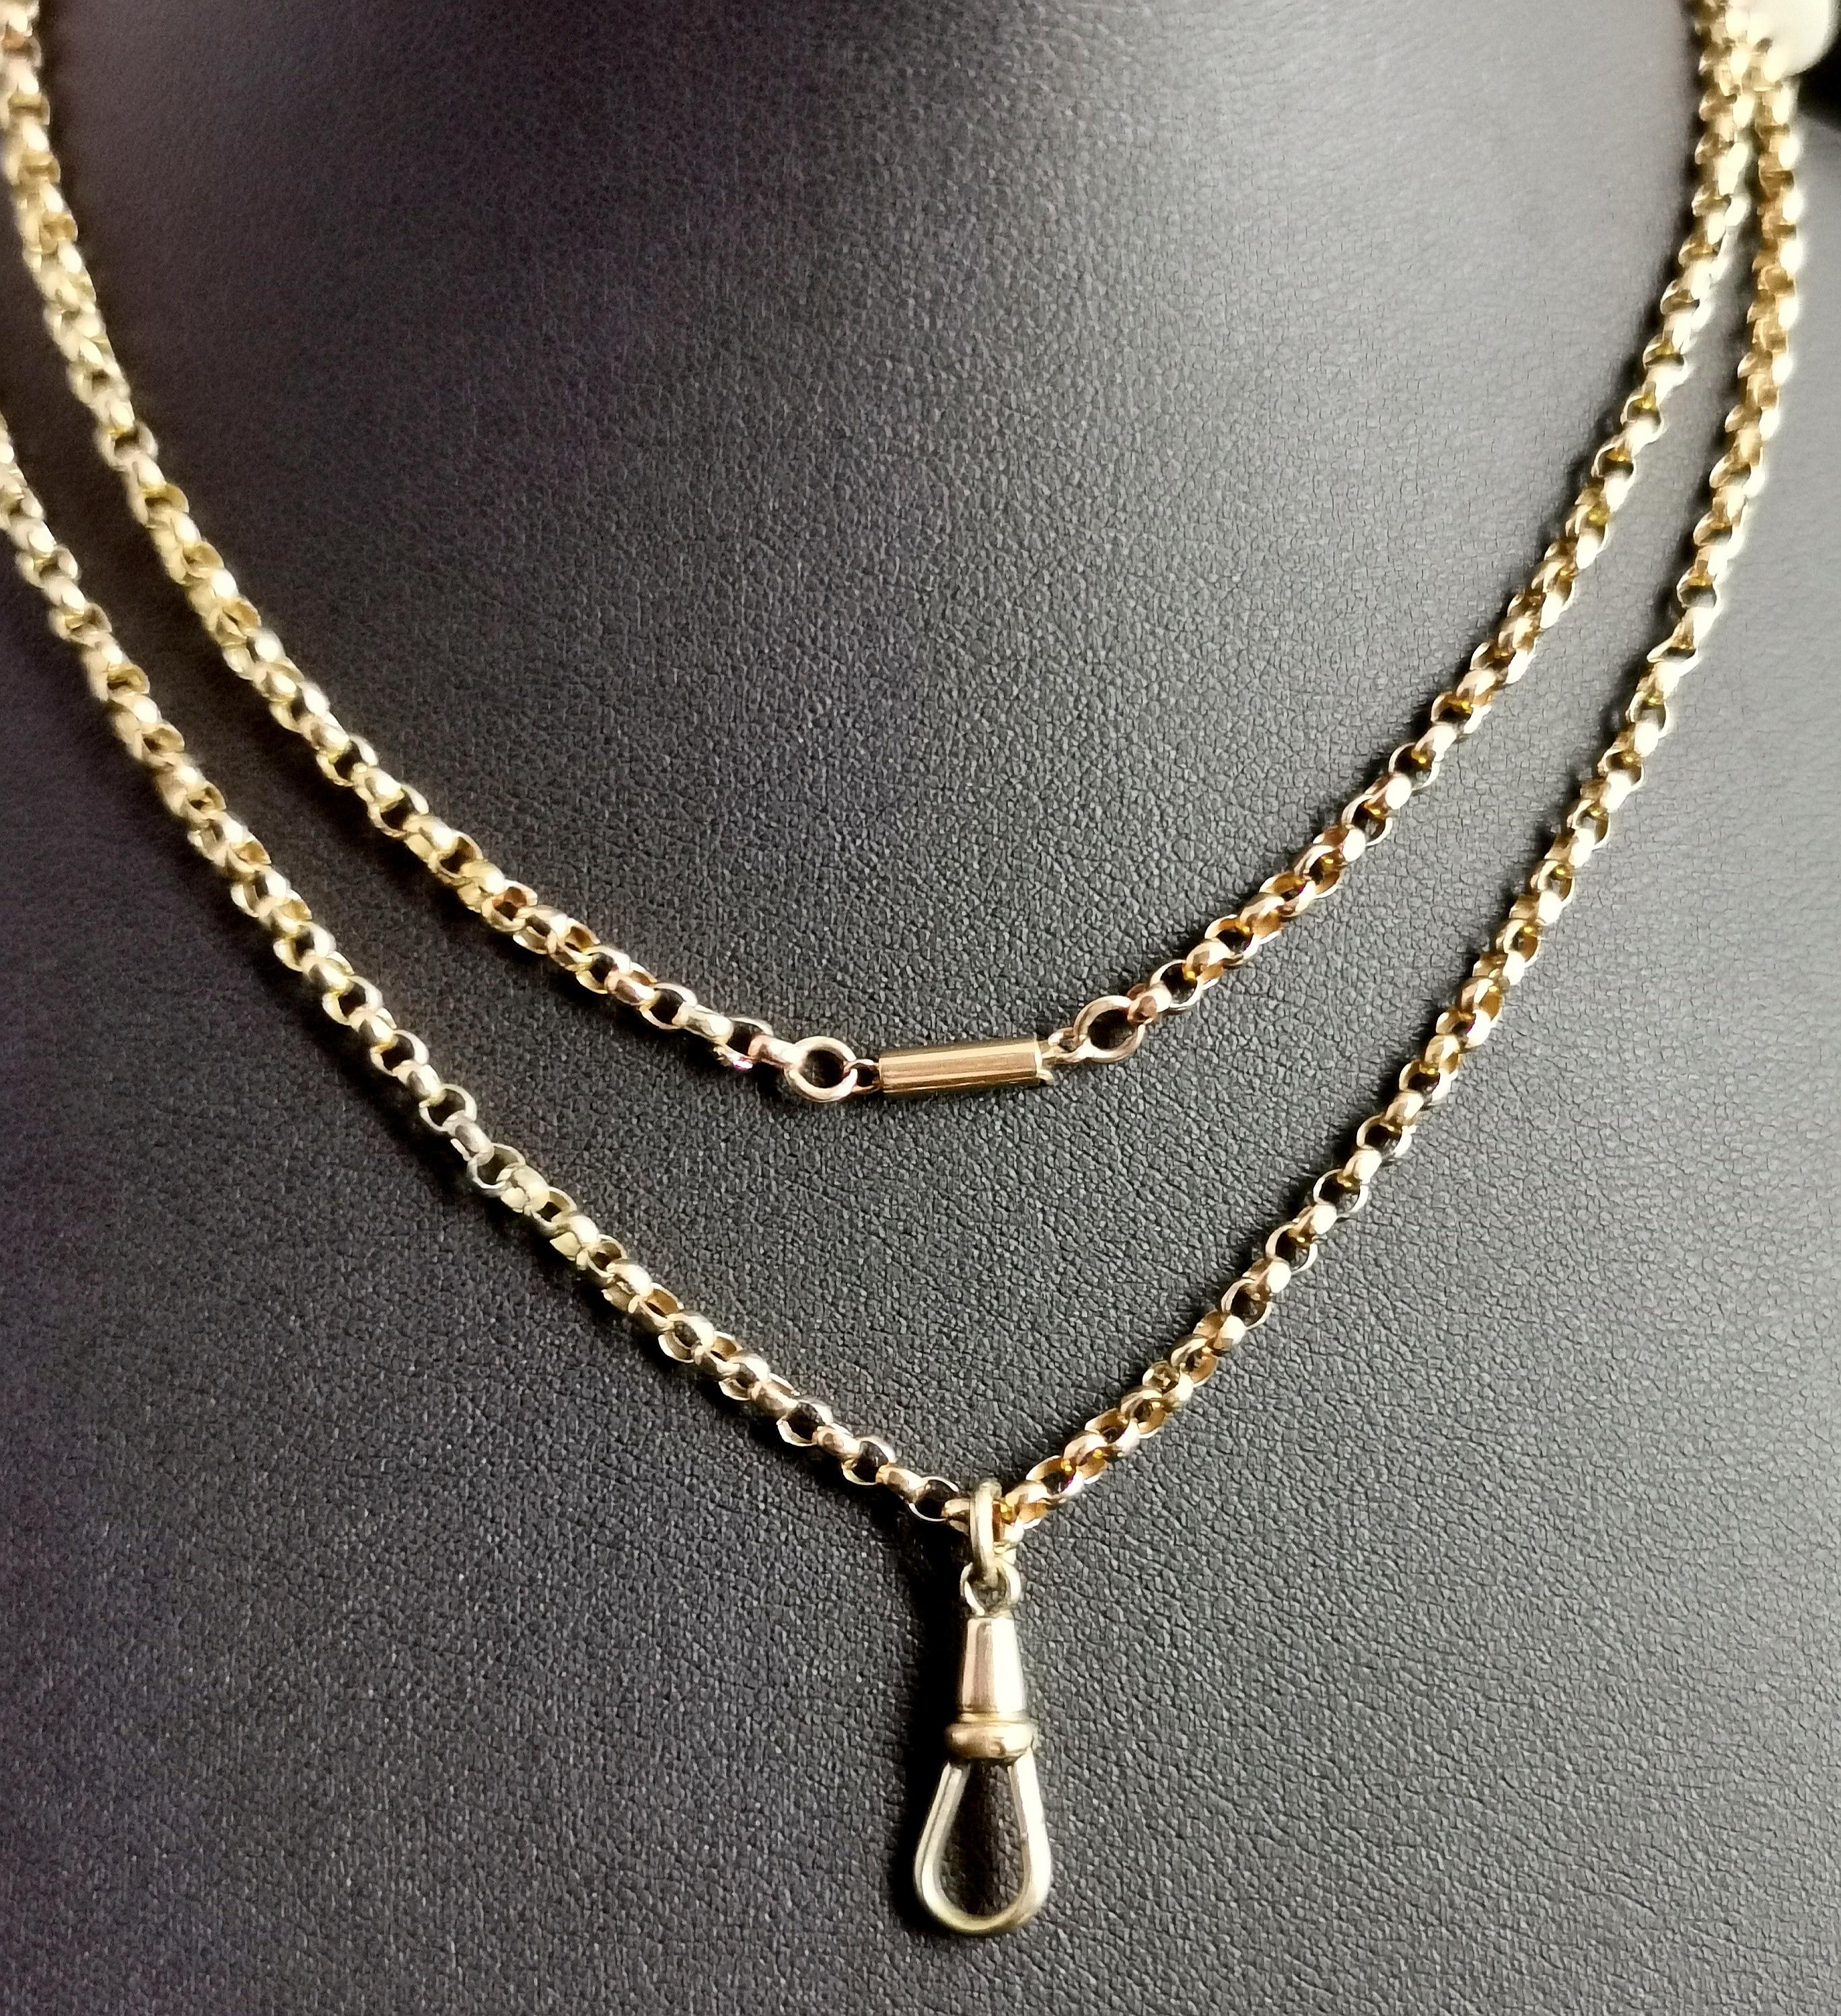 A beautiful antique, late Victorian 9kt gold Belcher or rolo link chain necklace.

Rich yellow gold links, this classic beauty is a good wearable length at 19